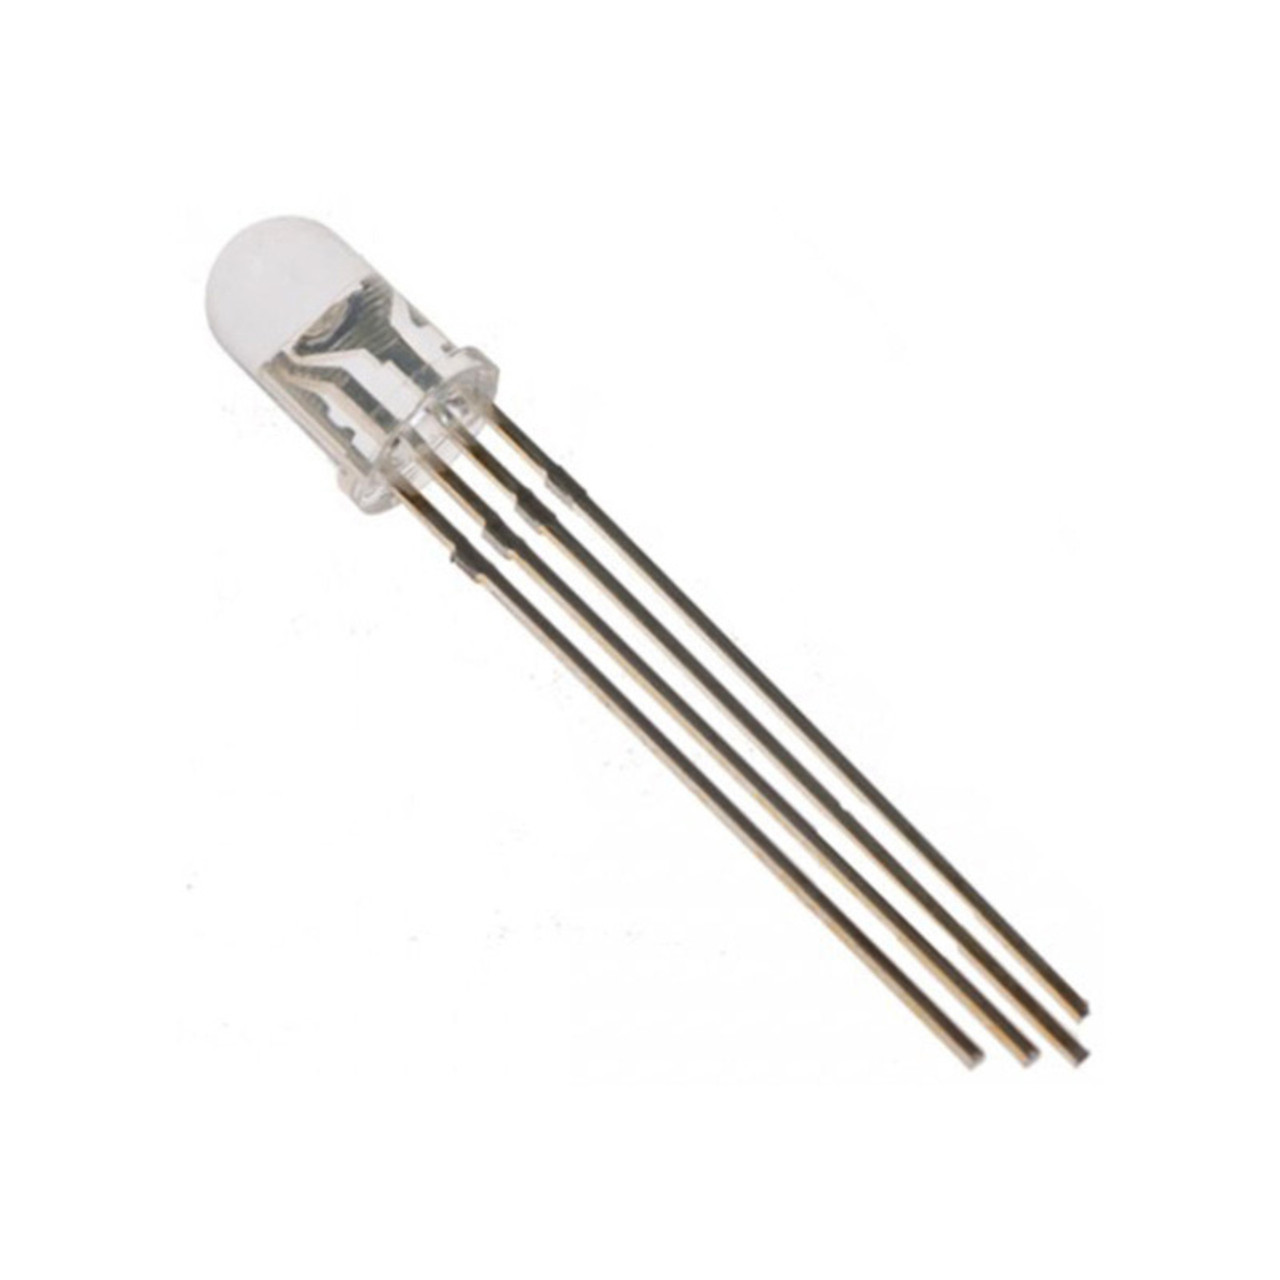 5MM 4pin Common Anode Clear RGB Tri-Color Red Green Blue LED Diodes (10  Pieces) by Envistia Mall